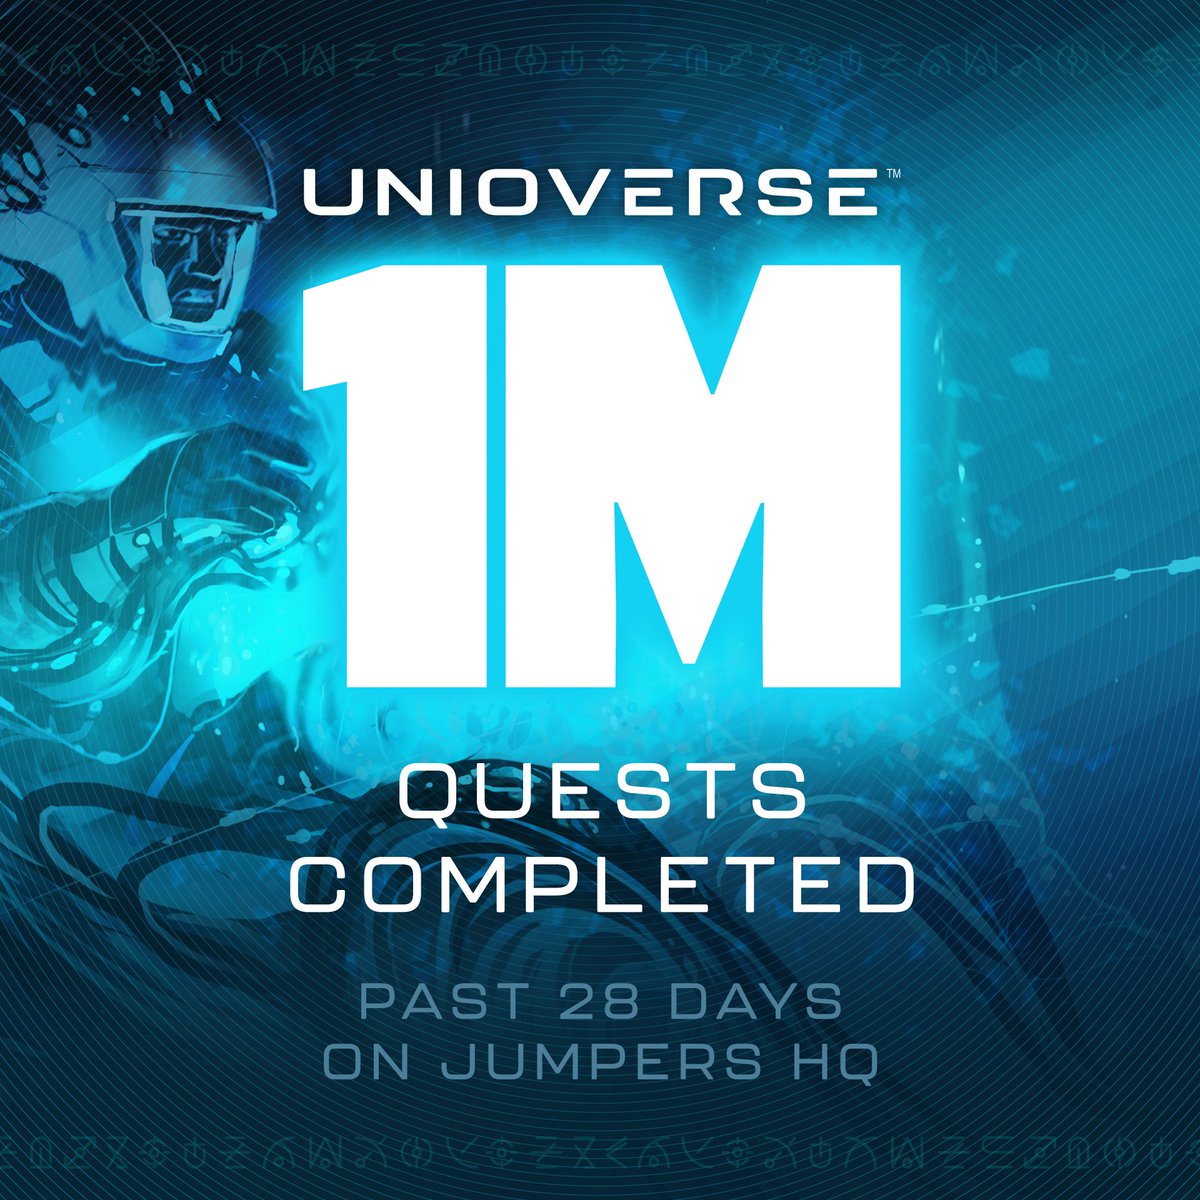 🎉Exciting news, Universe Jumpers! 🎉

We've surpassed 1 million completed quests!

Your dedication and passion are what unite the Universe. Thank you for being a part of this journey! 💫